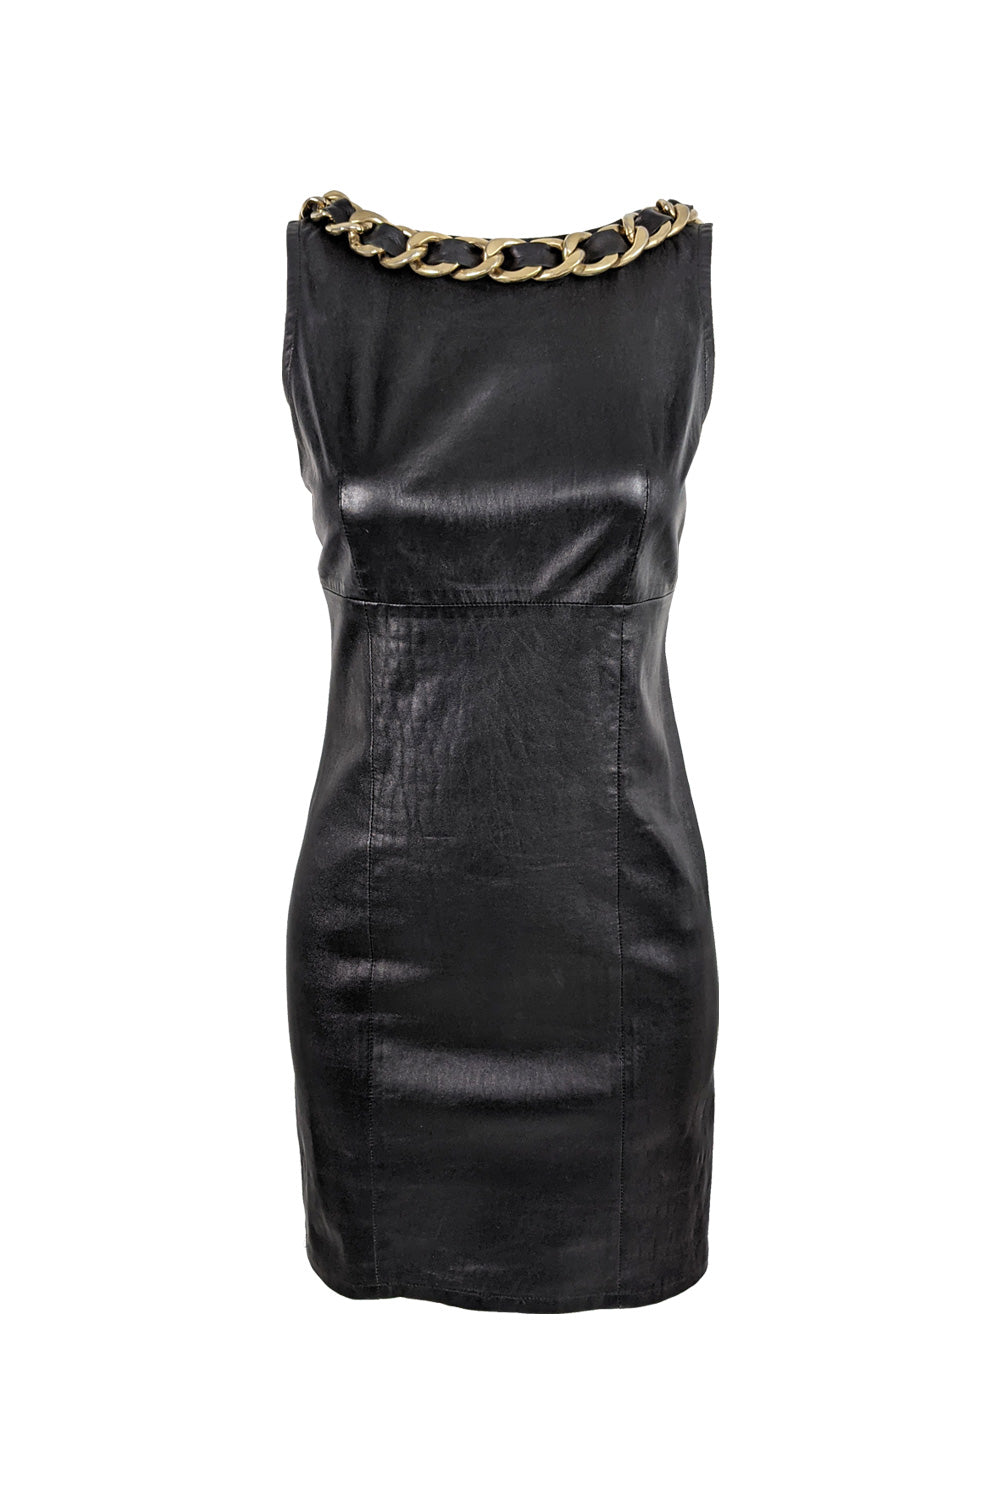 Preowned Leather Interlaced Chain Mini Dress